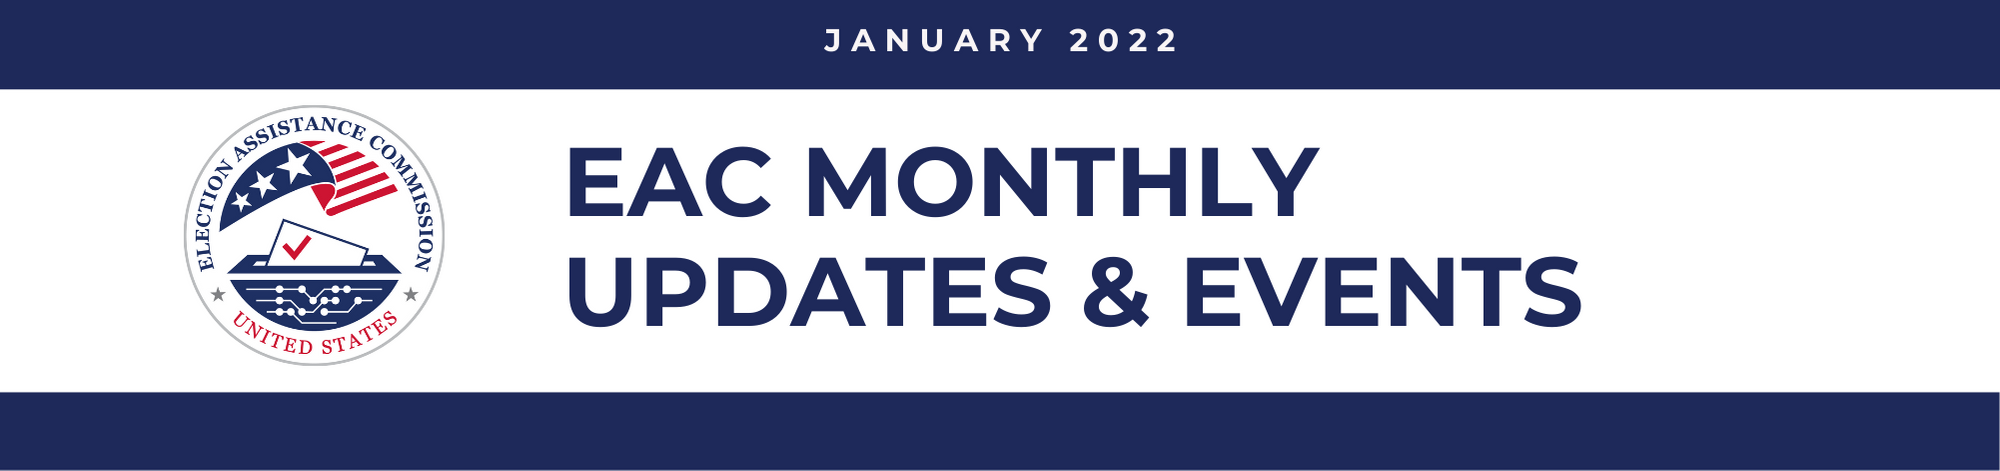 January 2022 EAC Monthly Updates & Events